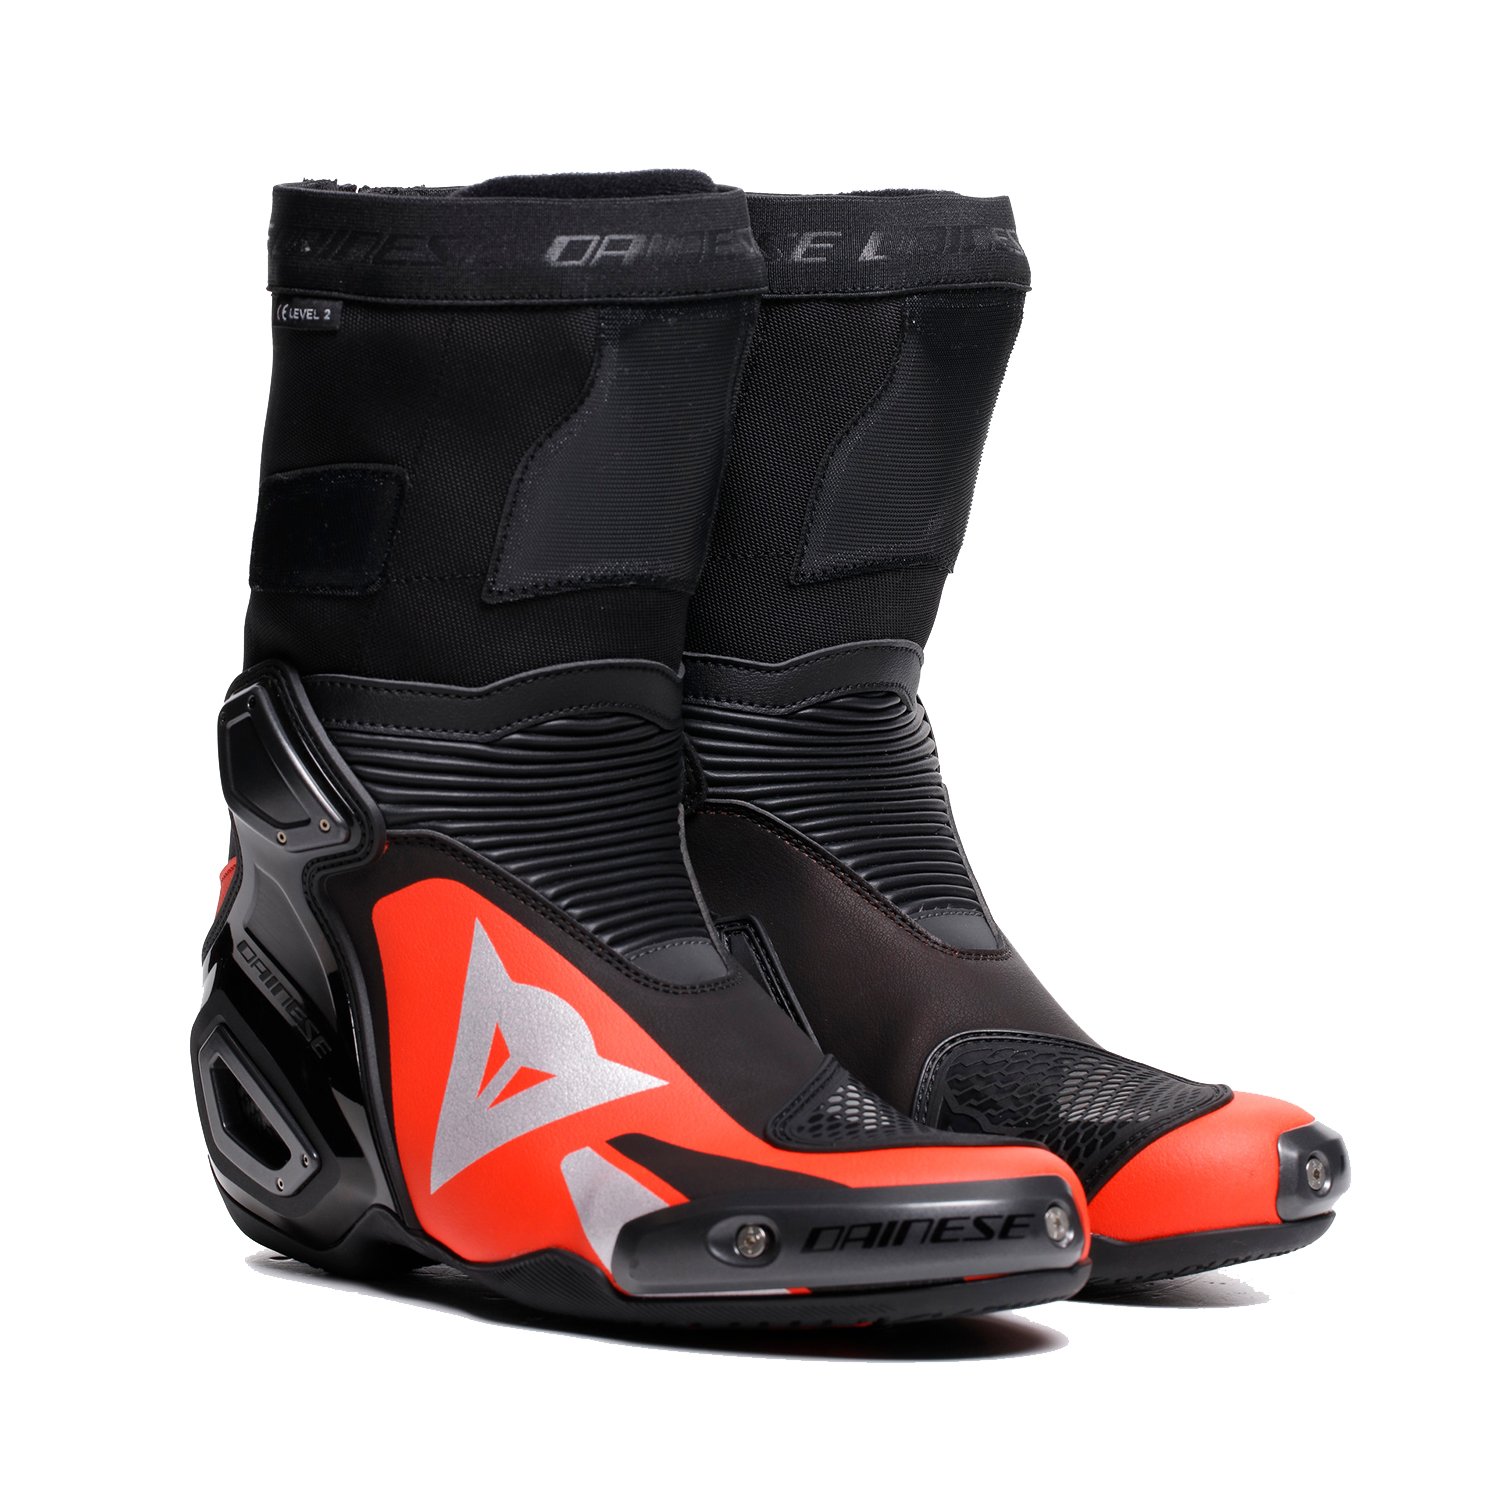 Image of EU Dainese Axial 2 Boots Black Red Fluo Taille 40